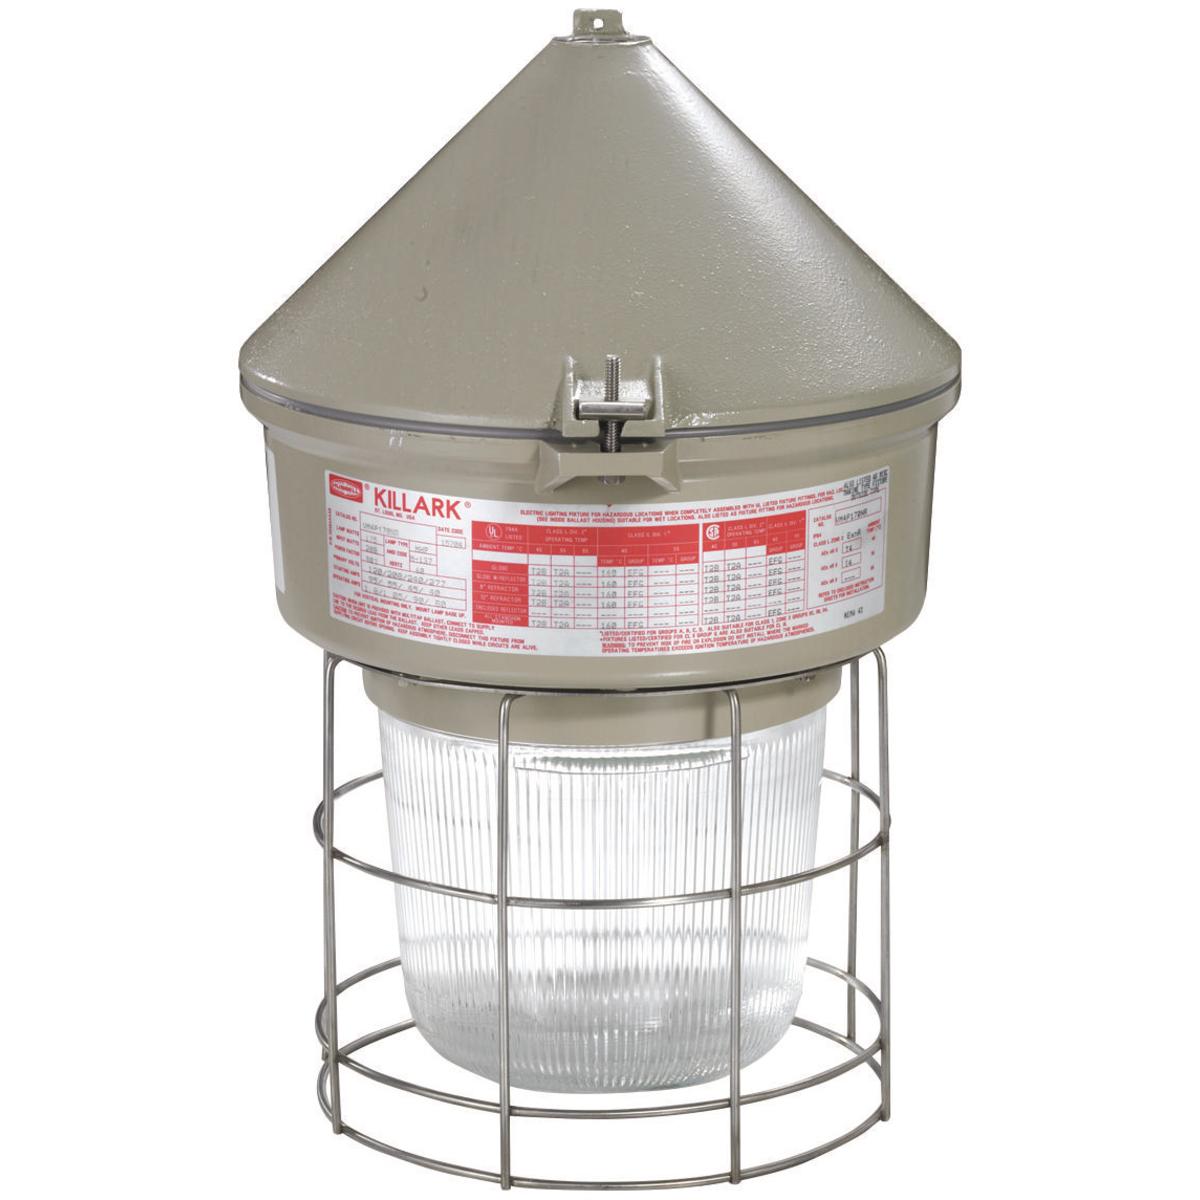 Hubbell VM4S075C2GLG VM4 Series - 70W High Pressure Sodium 480V - 3/4" Cone Top - Globe and Guard  ; Ballast tank and splice box – corrosion resistant copper-free aluminum alloy with baked powder epoxy/polyester finish, electrostatically applied for complete, uniform corrosio